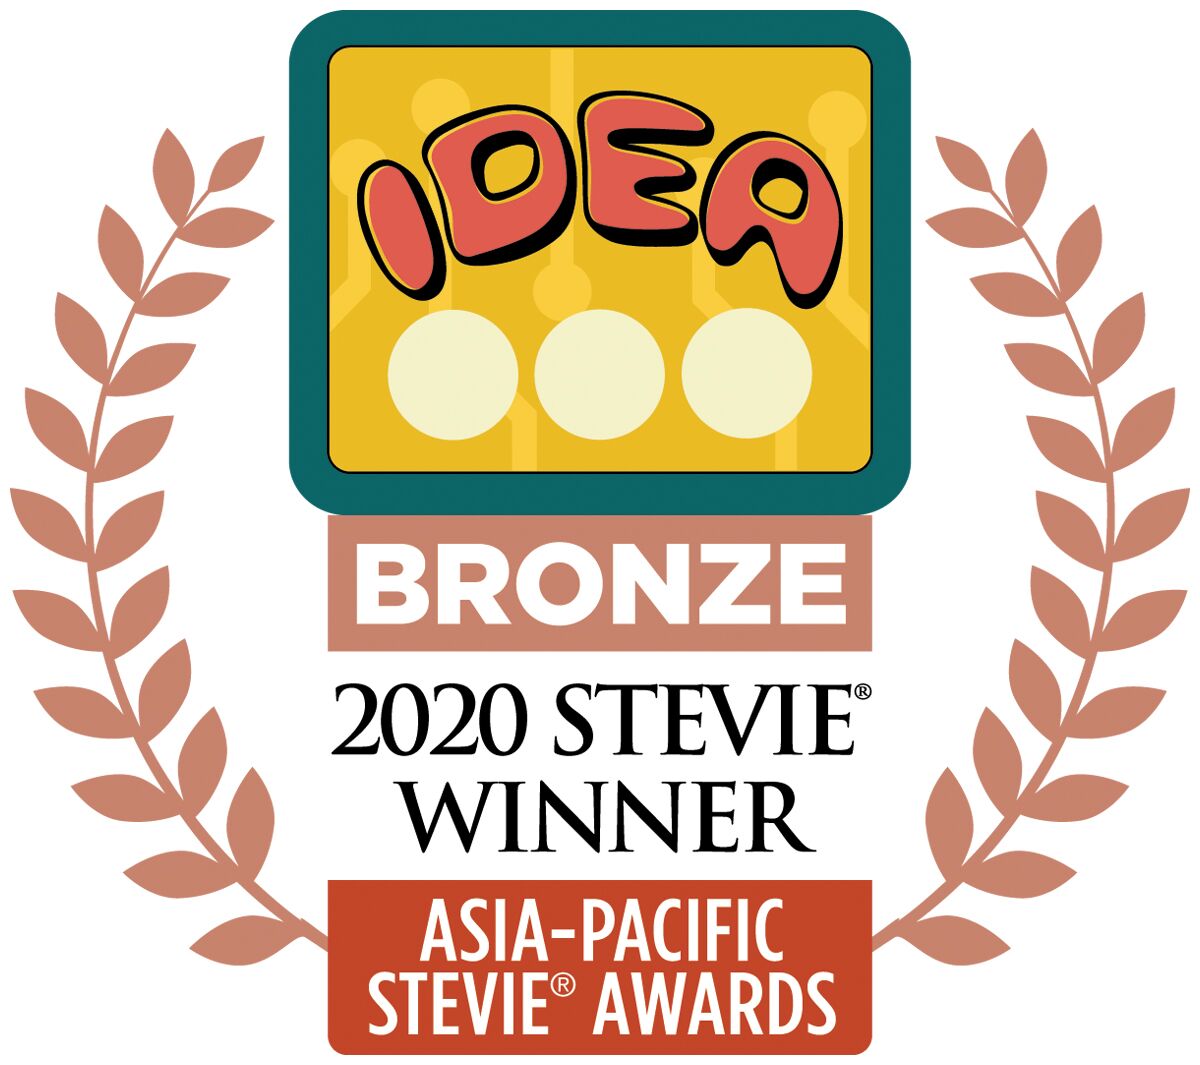 Award Badge for 2020 Asia-Pacific Stevie Award. Security Health Check won bronze award for innovation in business-to-business services